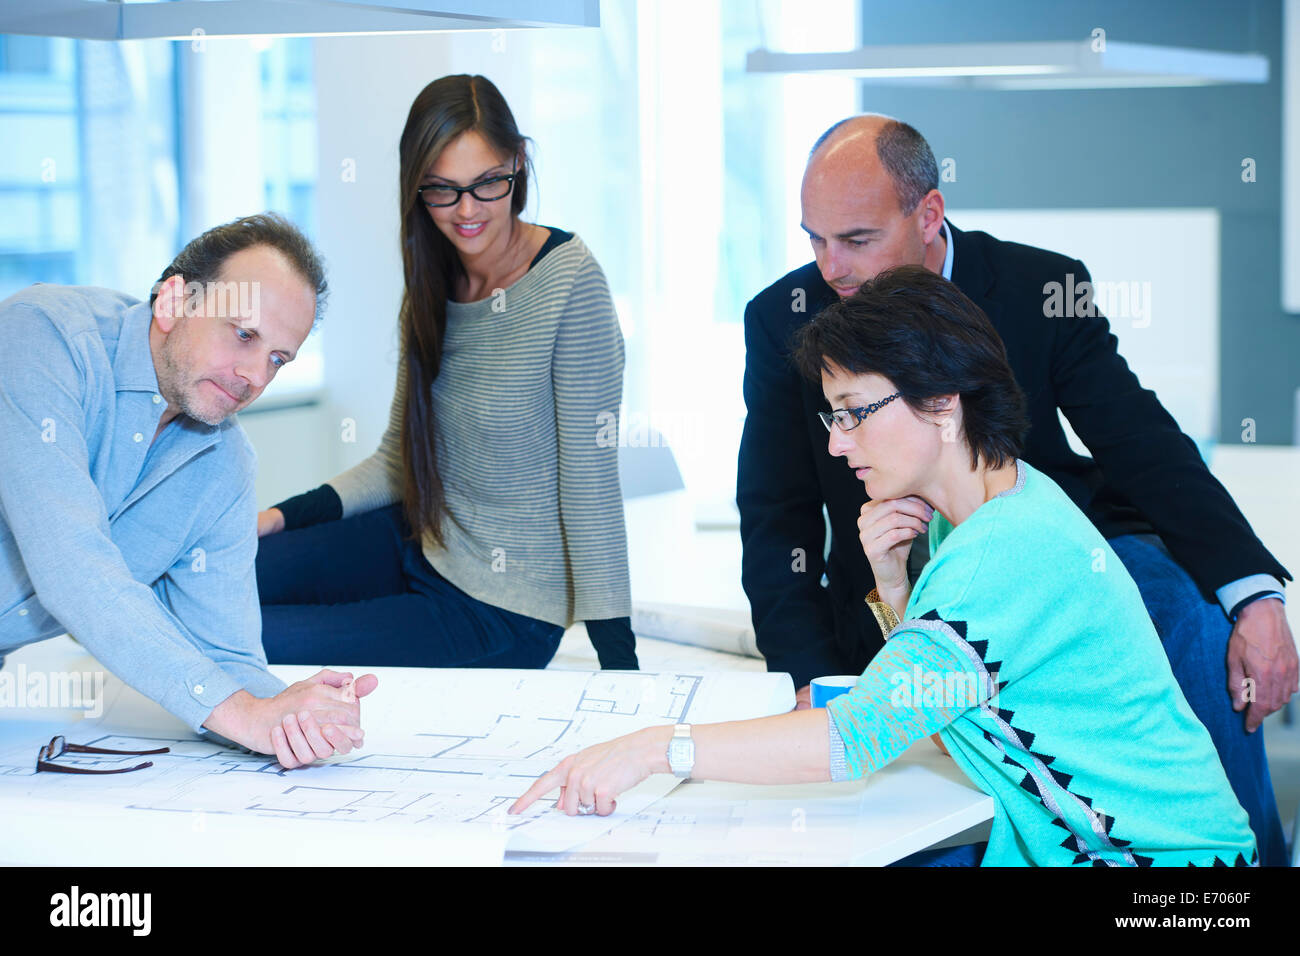 Group of business people looking at plans Stock Photo